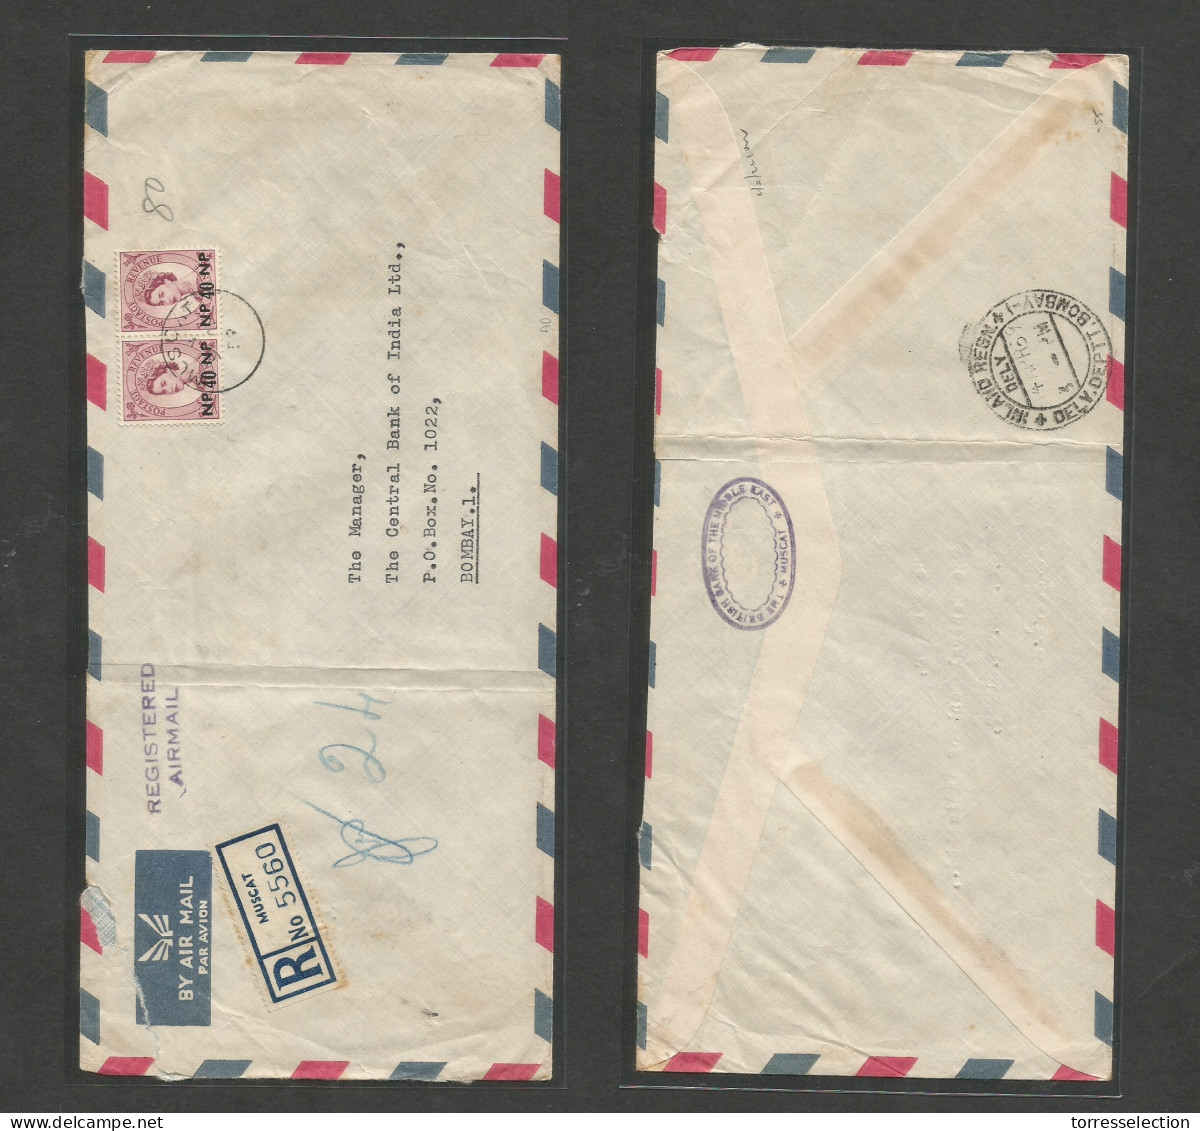 OMAN. 1959 (9 Apr) Muscat - India, Bombay (14 Apr) QEII . Registered Air Usage, New Currency 40 NP Hong Pair. Fine + Arr - Oman